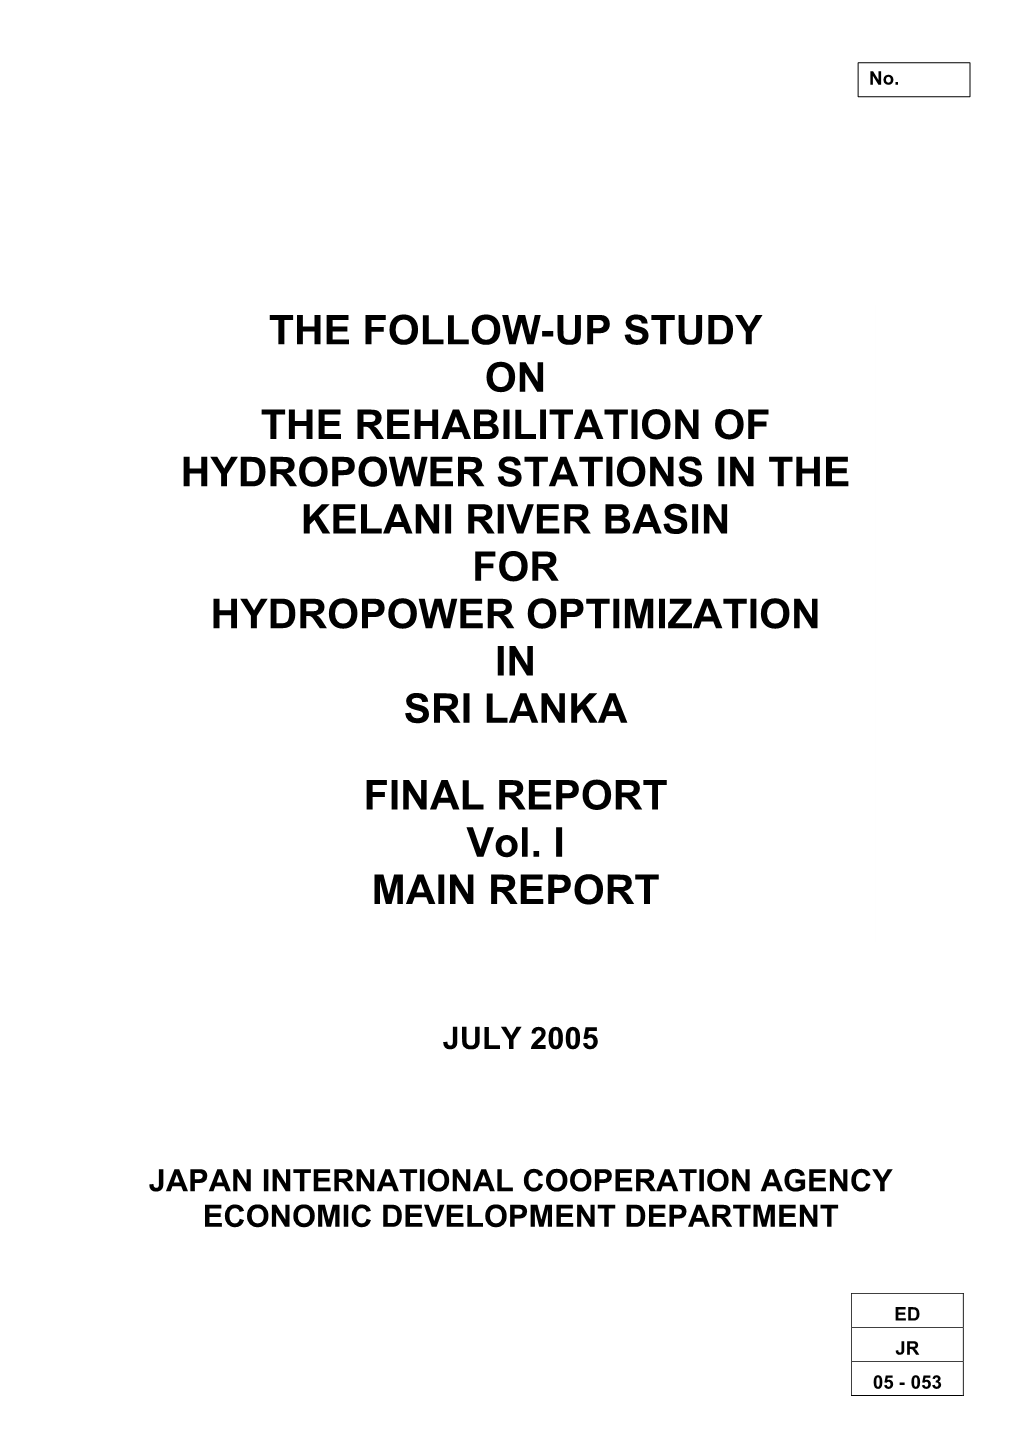 The Follow-Up Study on the Rehabilitation of Hydropower Stations in the Kelani River Basin for Hydropower Optimization in Sri La